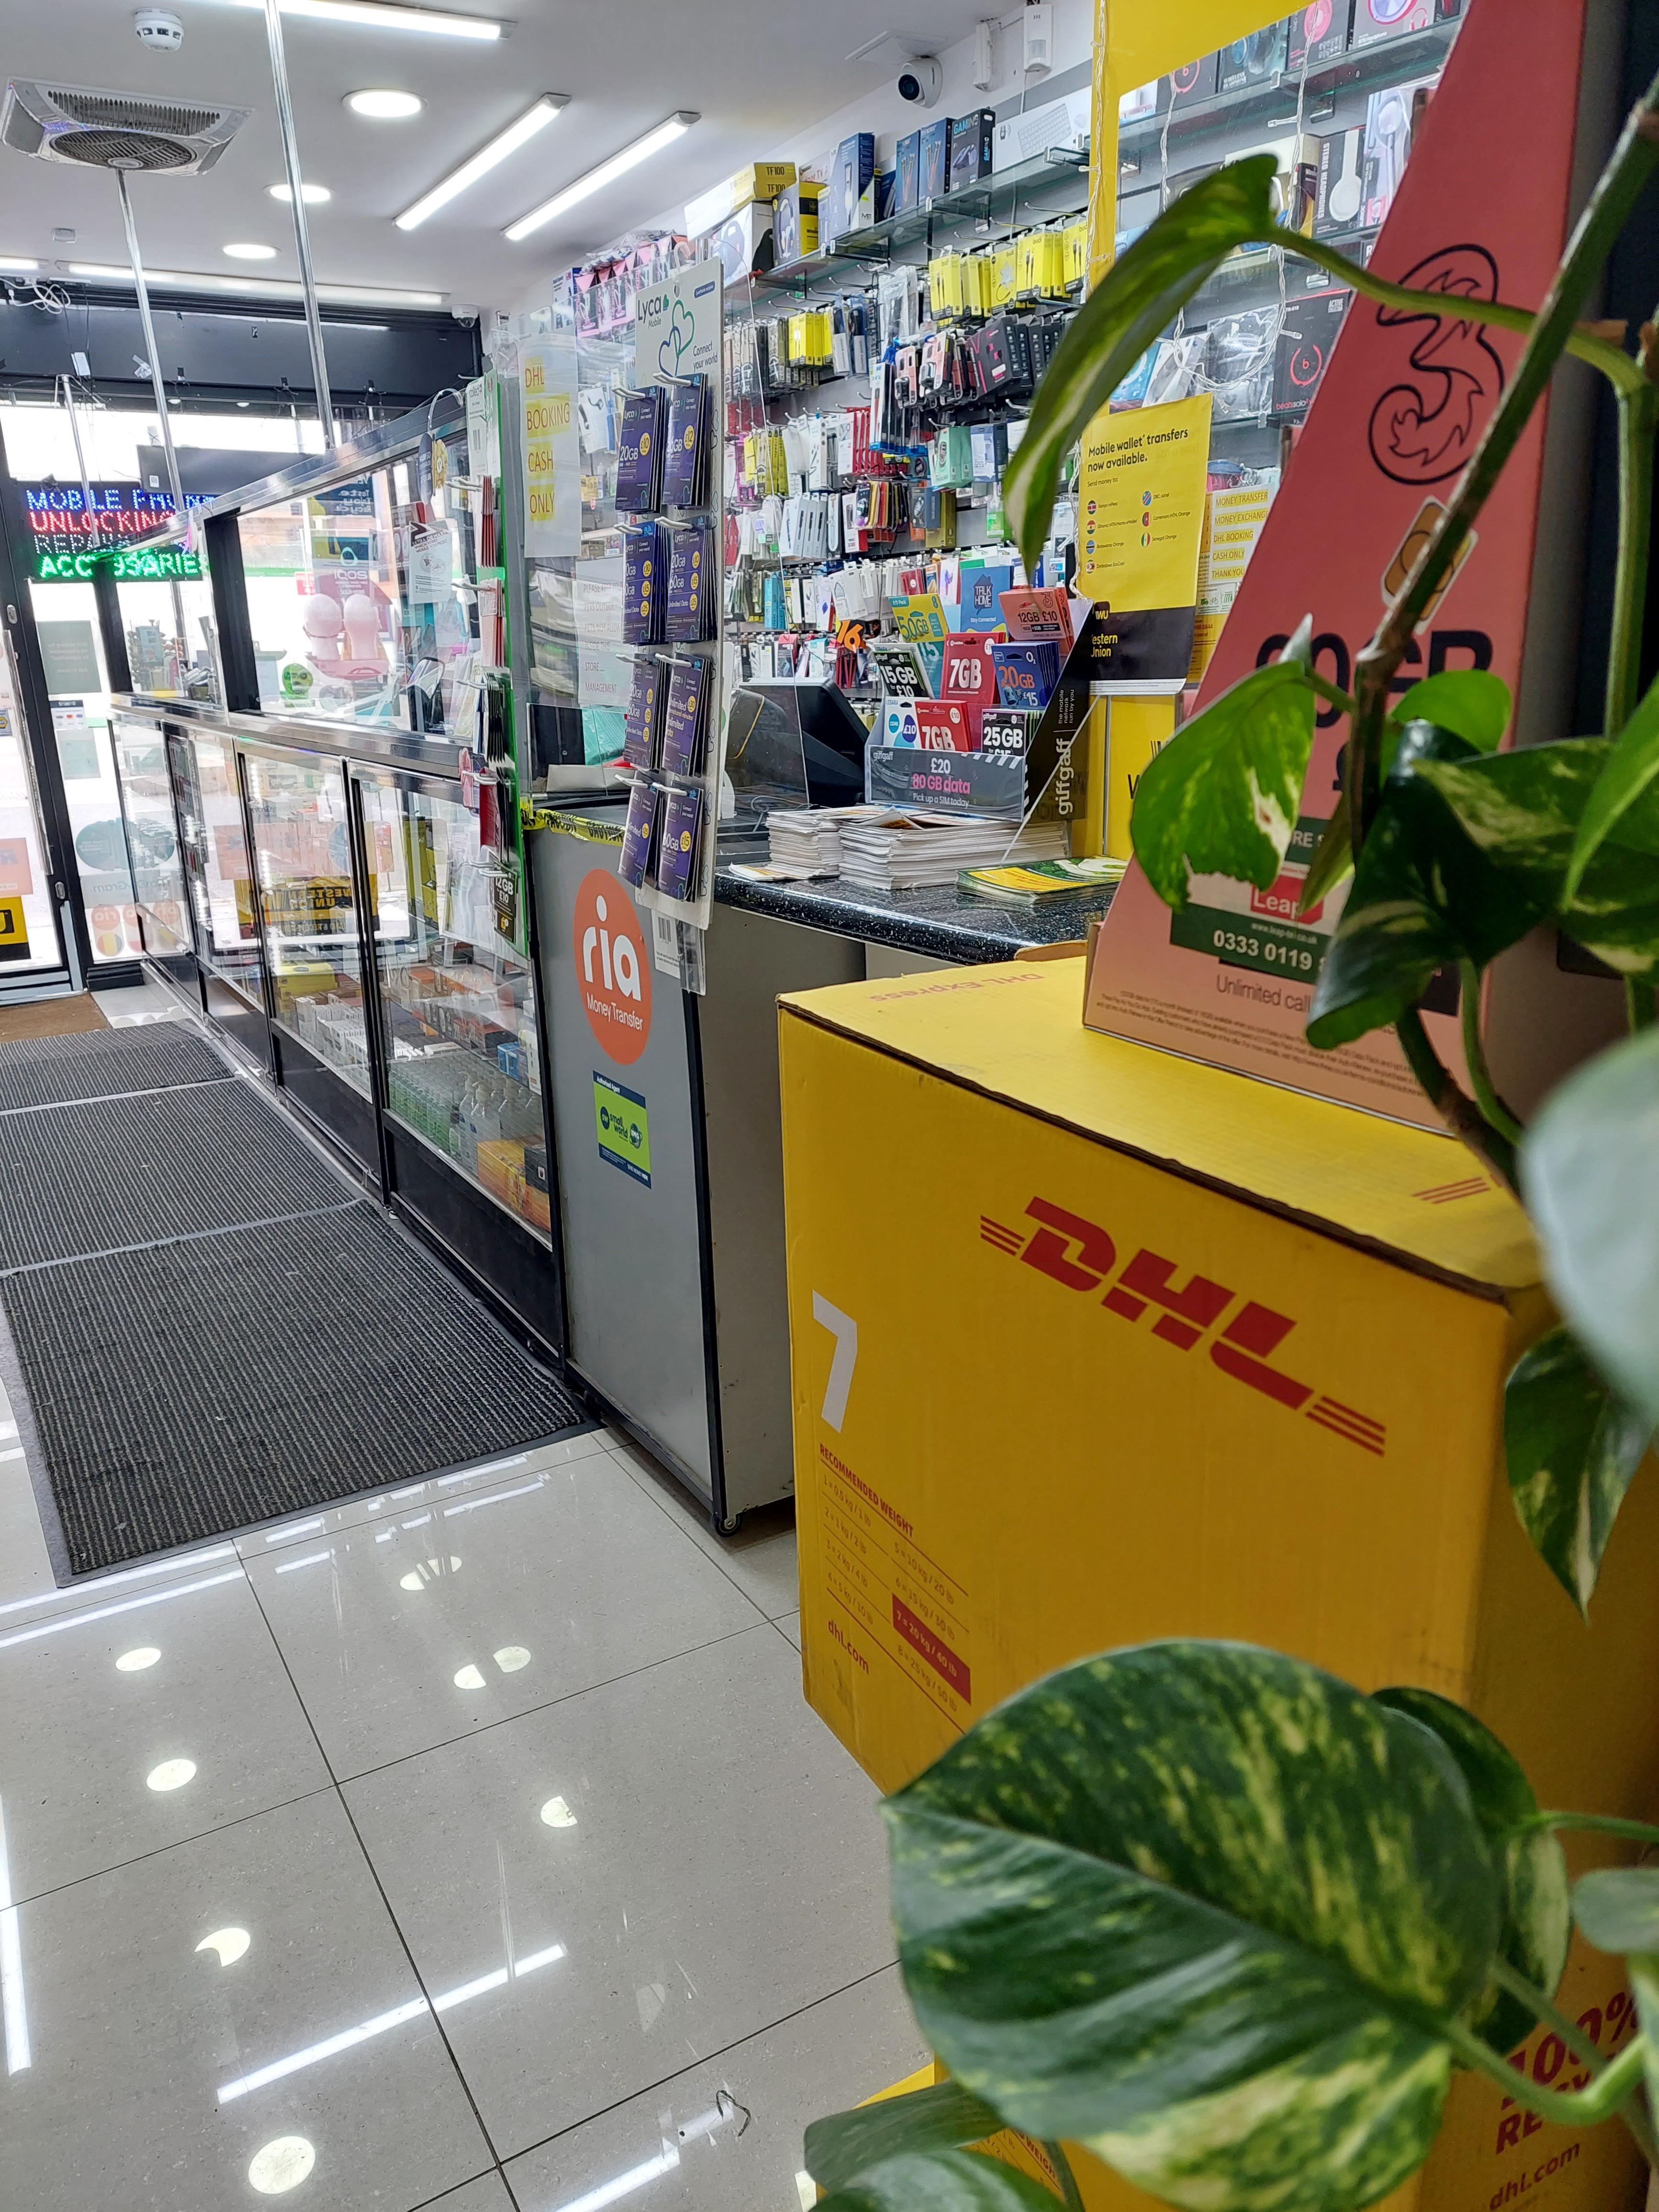 Images DHL Express Service Point (Fast Global Money Exchange)